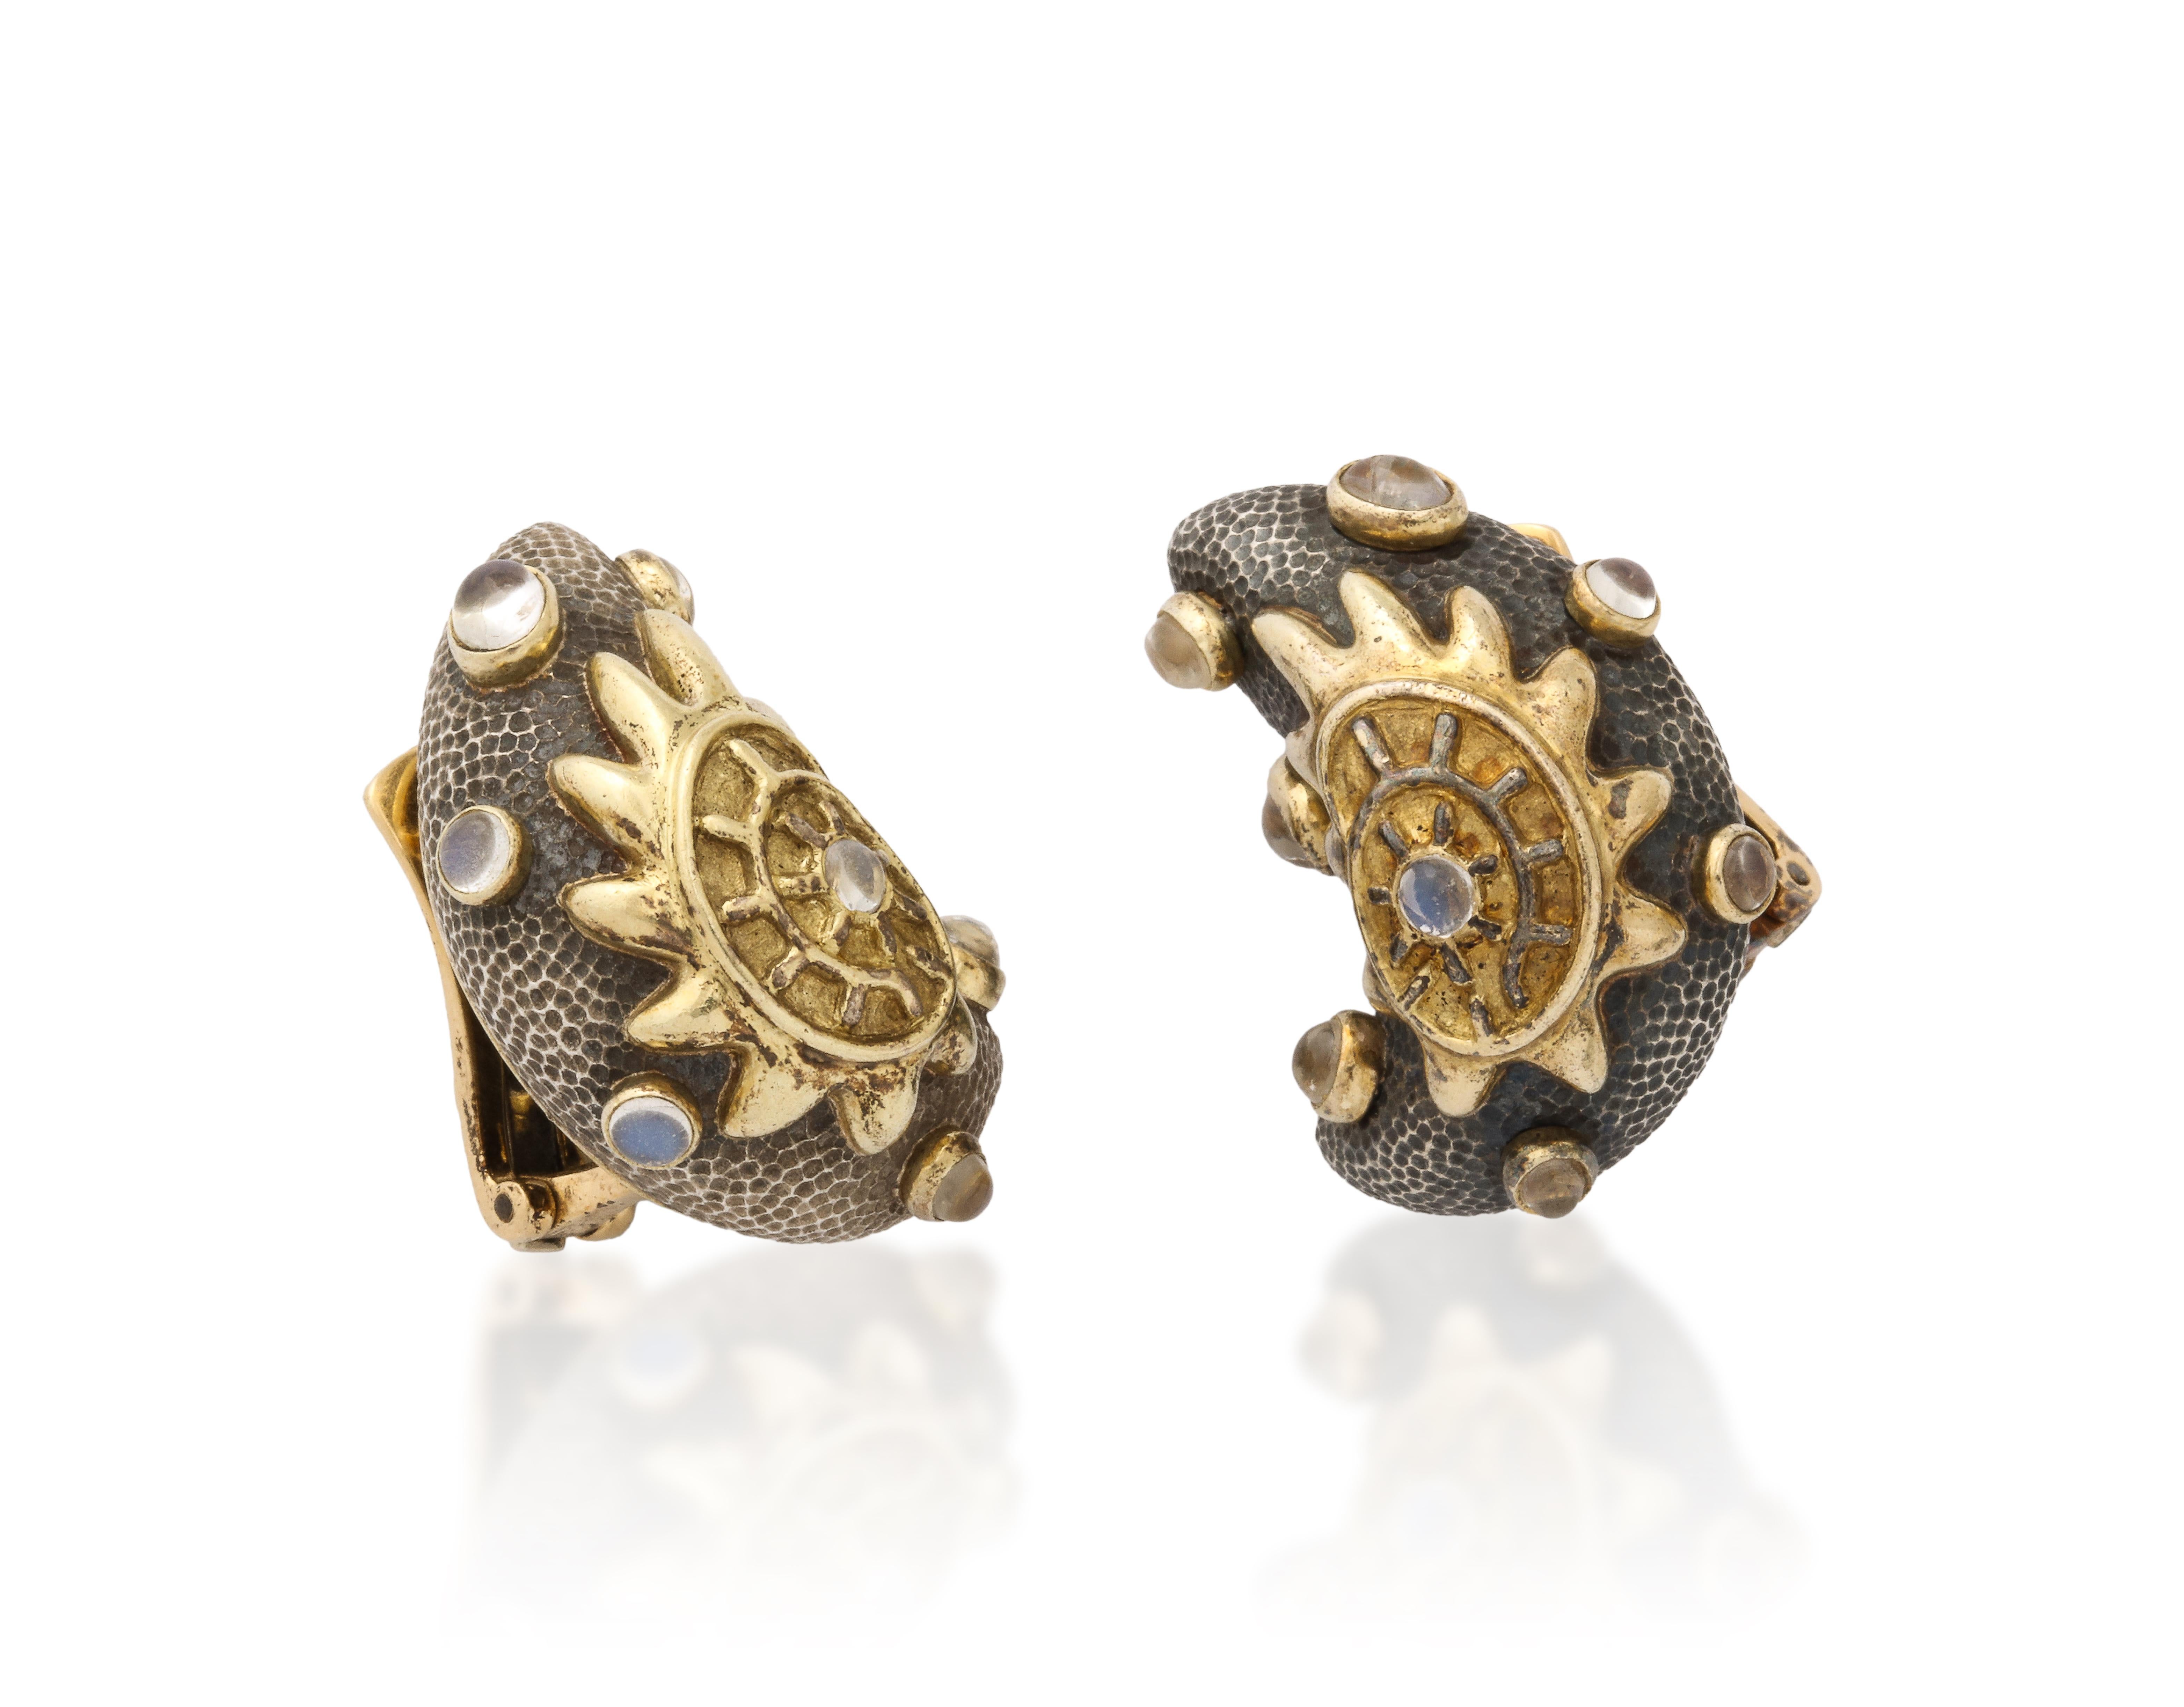 The stylish jeweler Marilyn Cooperman always named her designs and these earrings are 